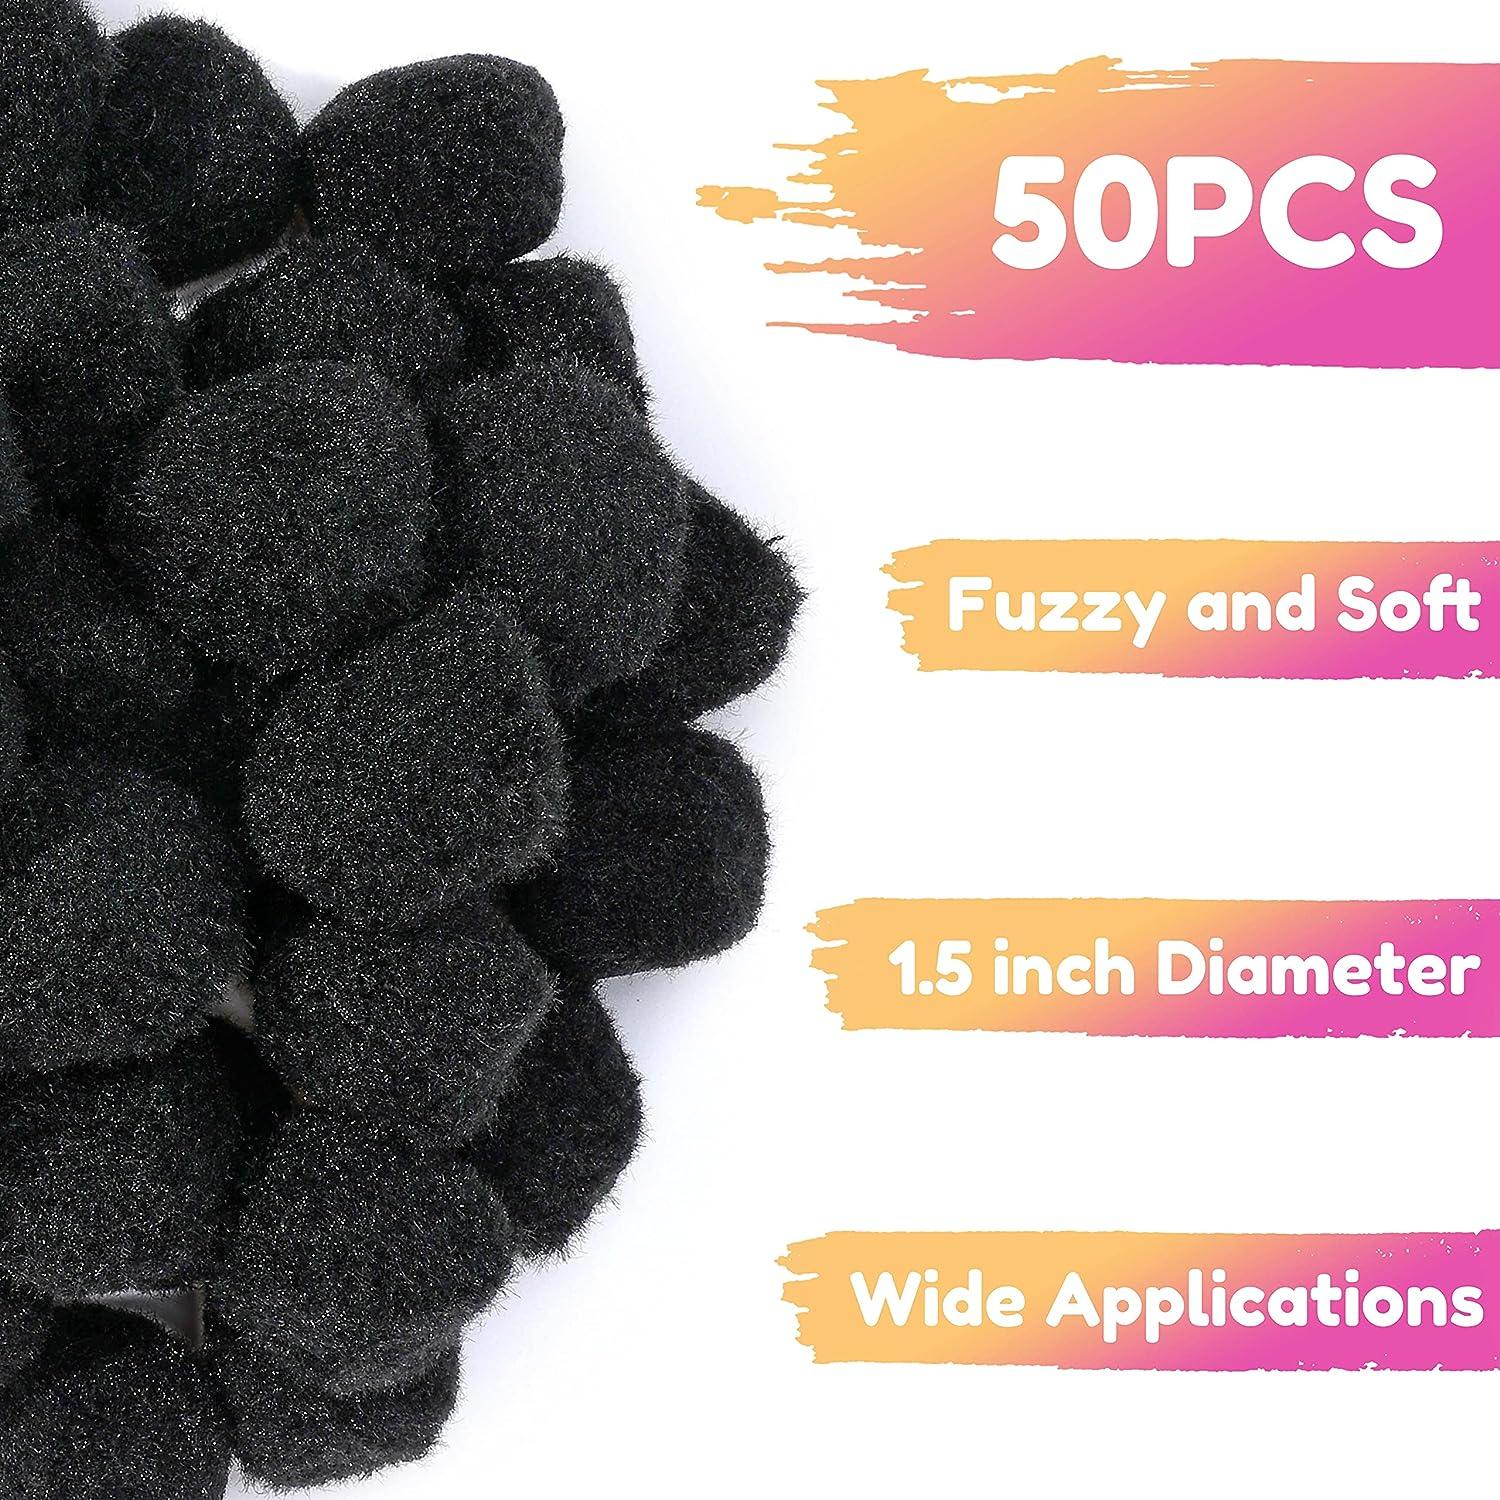 Caydo 1.5 inch Large Pom Poms, 50PCS Assorted Craft Pompom, Soft and Fuzzy  Pompoms Balls for DIY Creative Crafts Projects Decorations